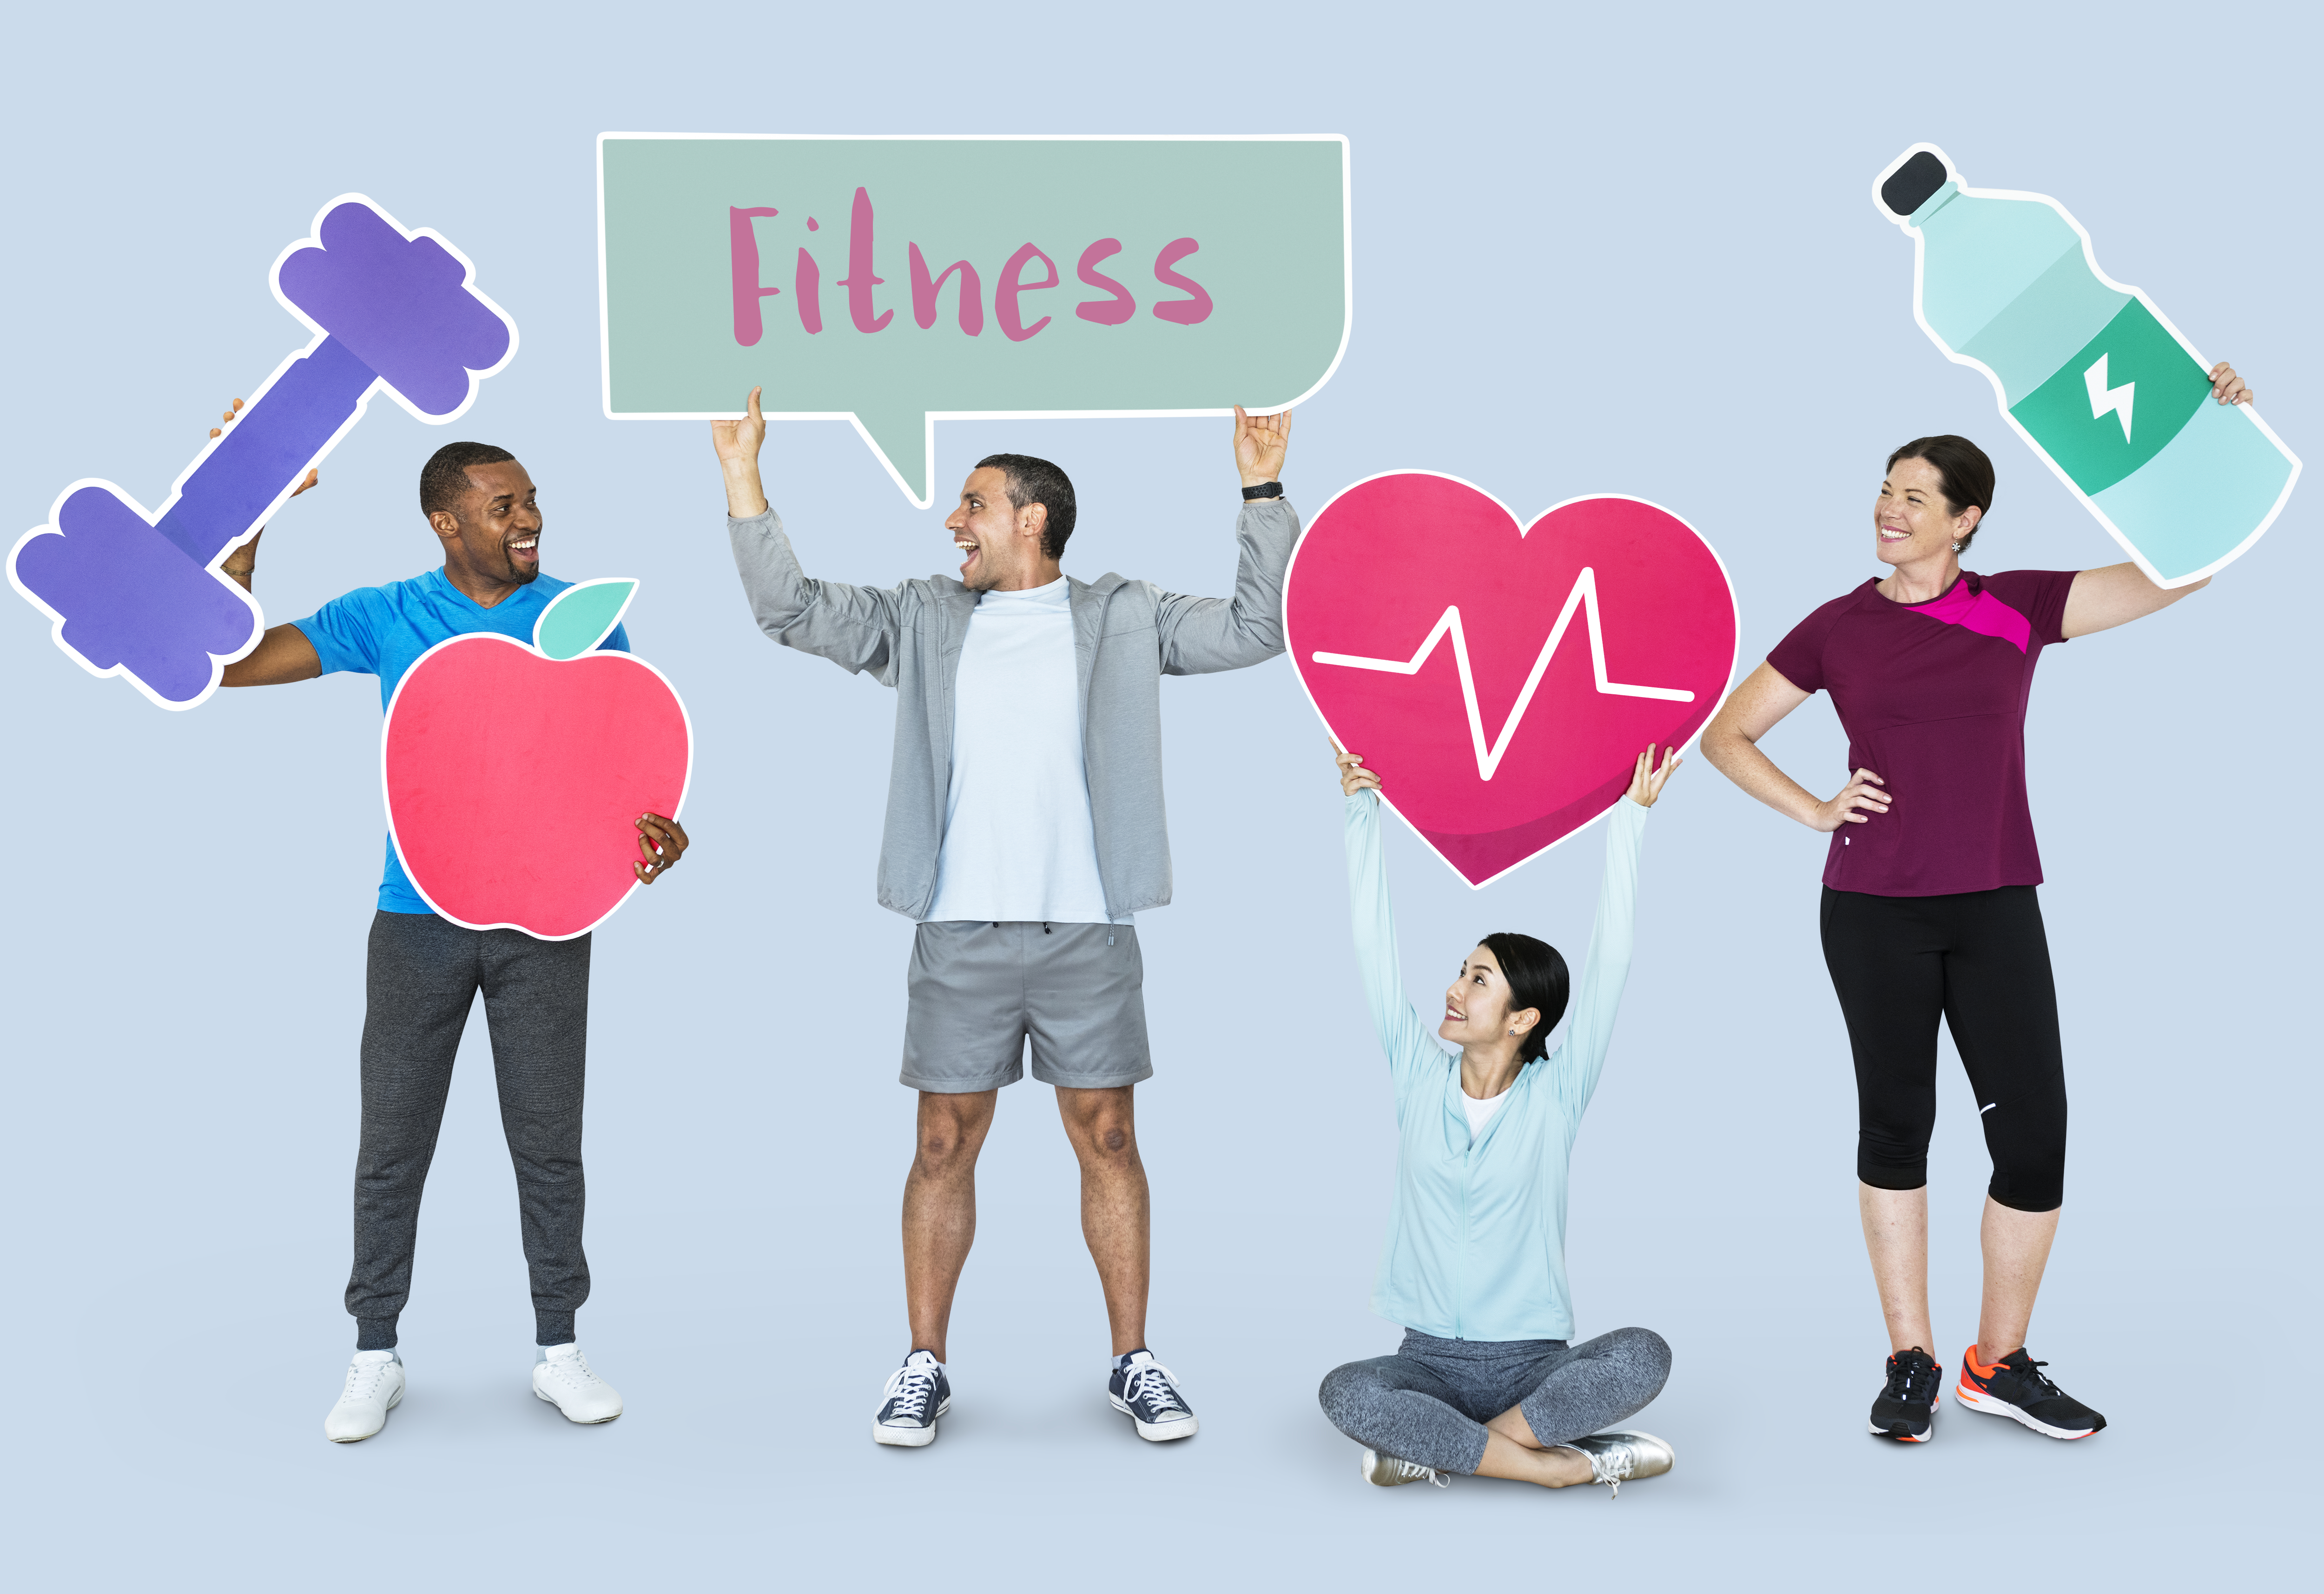 Group of diverse people holding health and fitness icons - Wellness Classes